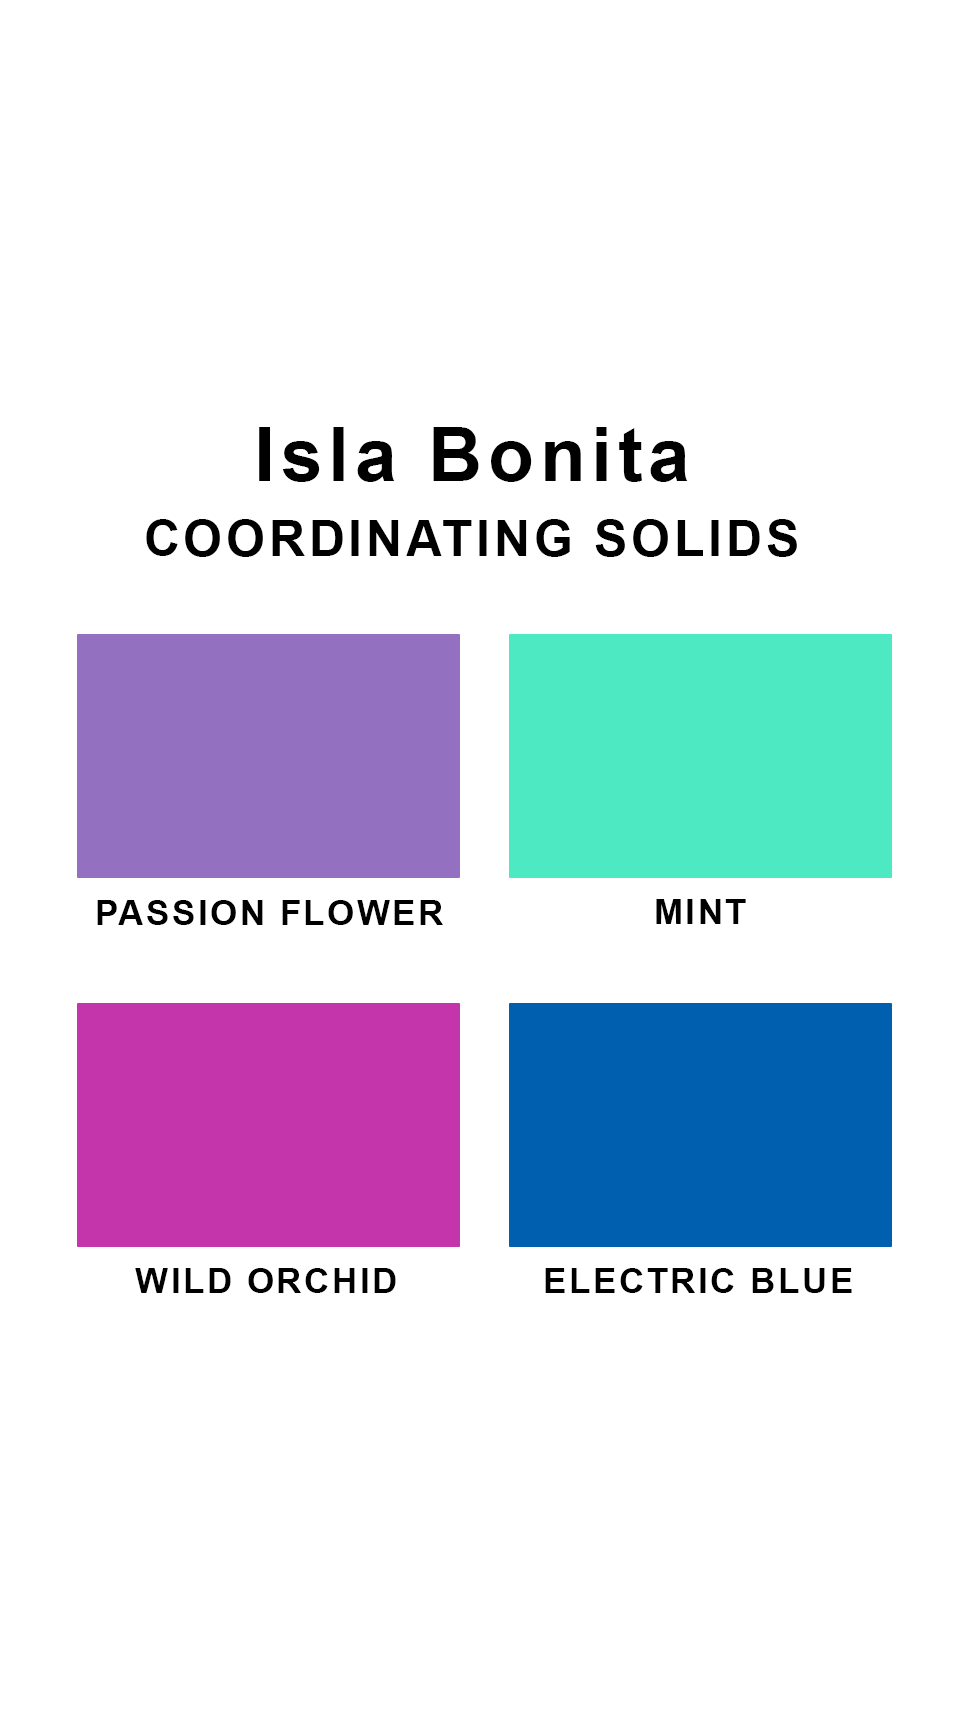 Coordinating solids chart for Sunsets Isla Bonita swimsuit print: Passion Flower, Mint, Wild Orchid, and Electric Blue